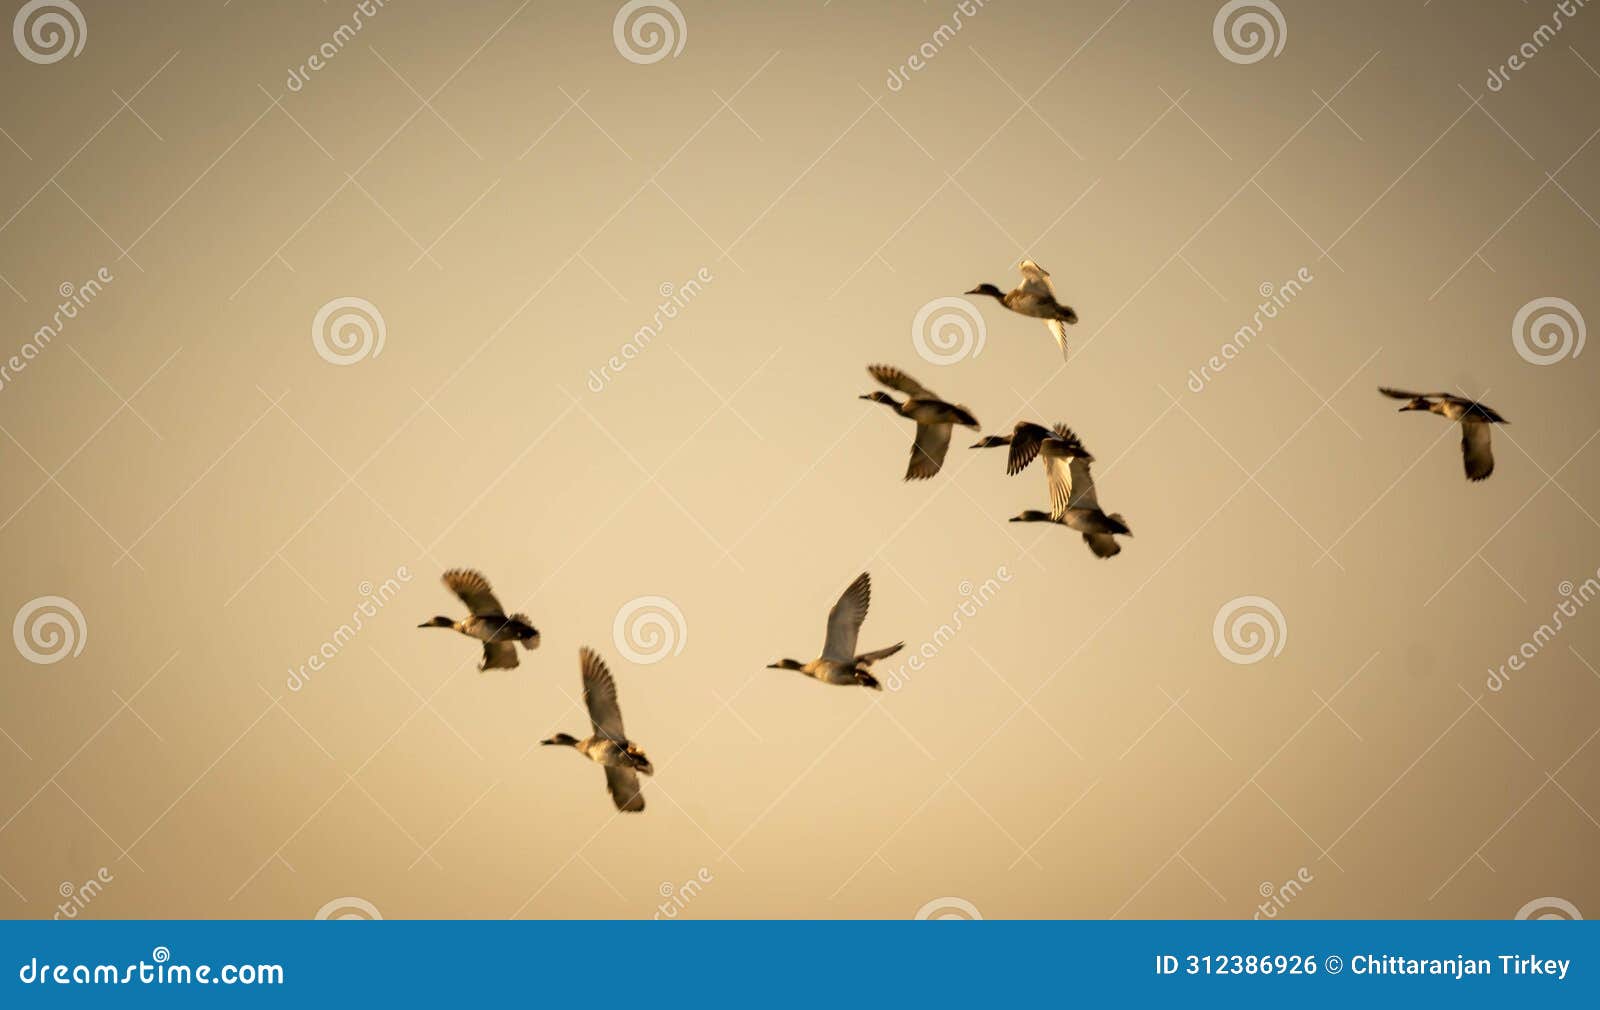 a flock is a gathering of individual birds to forage or travel collectively